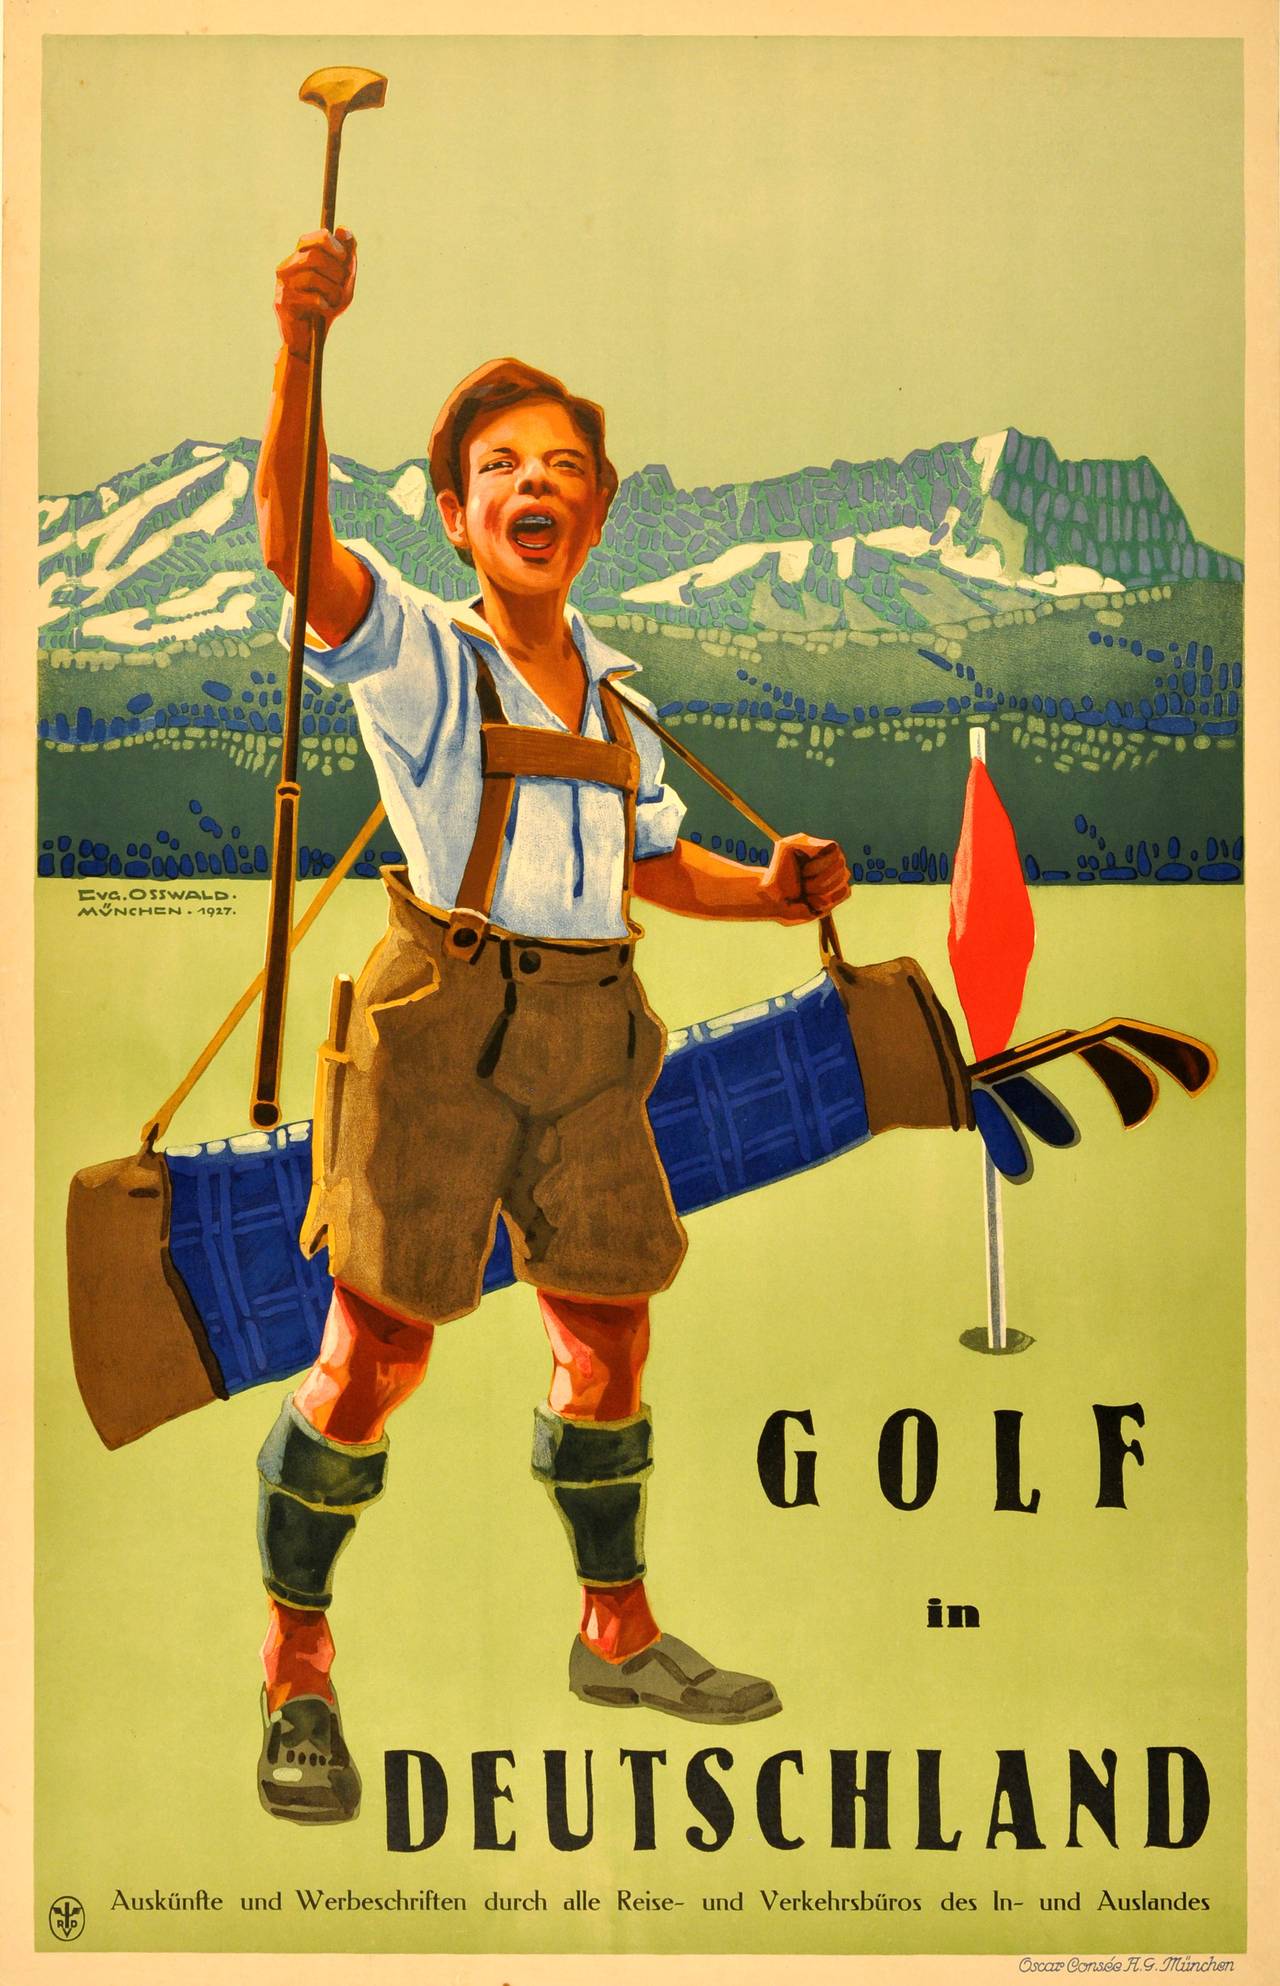 Original vintage poster promoting golf in Germany - Golf in Deutschland, featuring a young boy as a golf caddy wearing lederhosen holding up a golf club next to a hole, the red flag and mountains in the background. Design by Evgenie Osswald, Munich